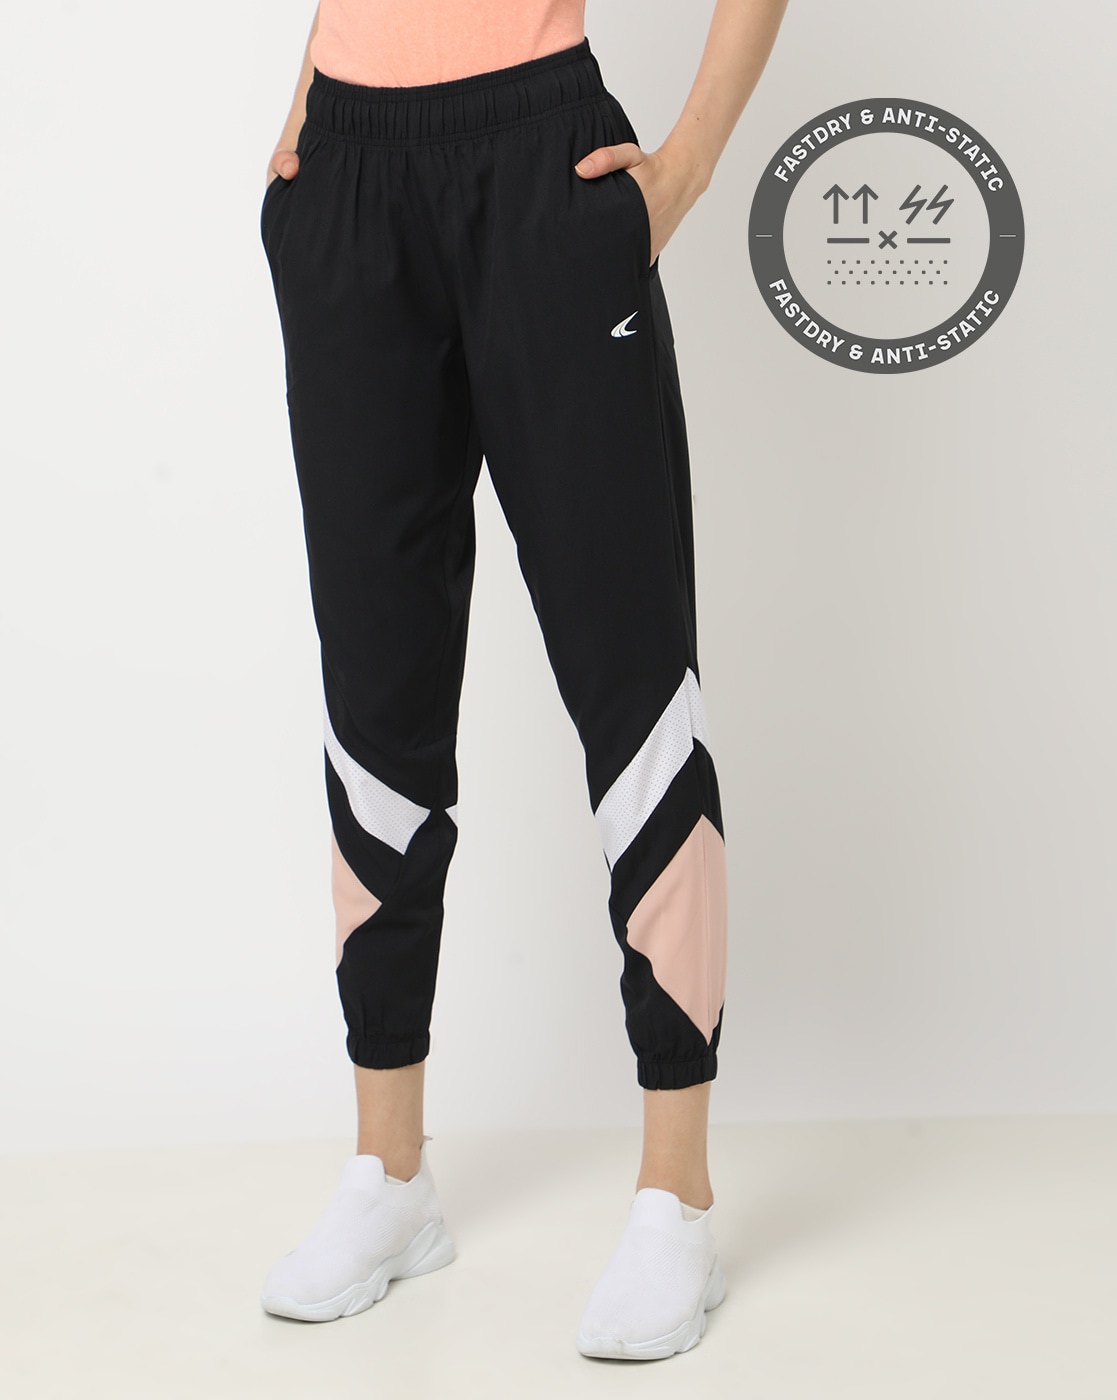 Buy Black Track Pants for Women by PERFORMAX Online